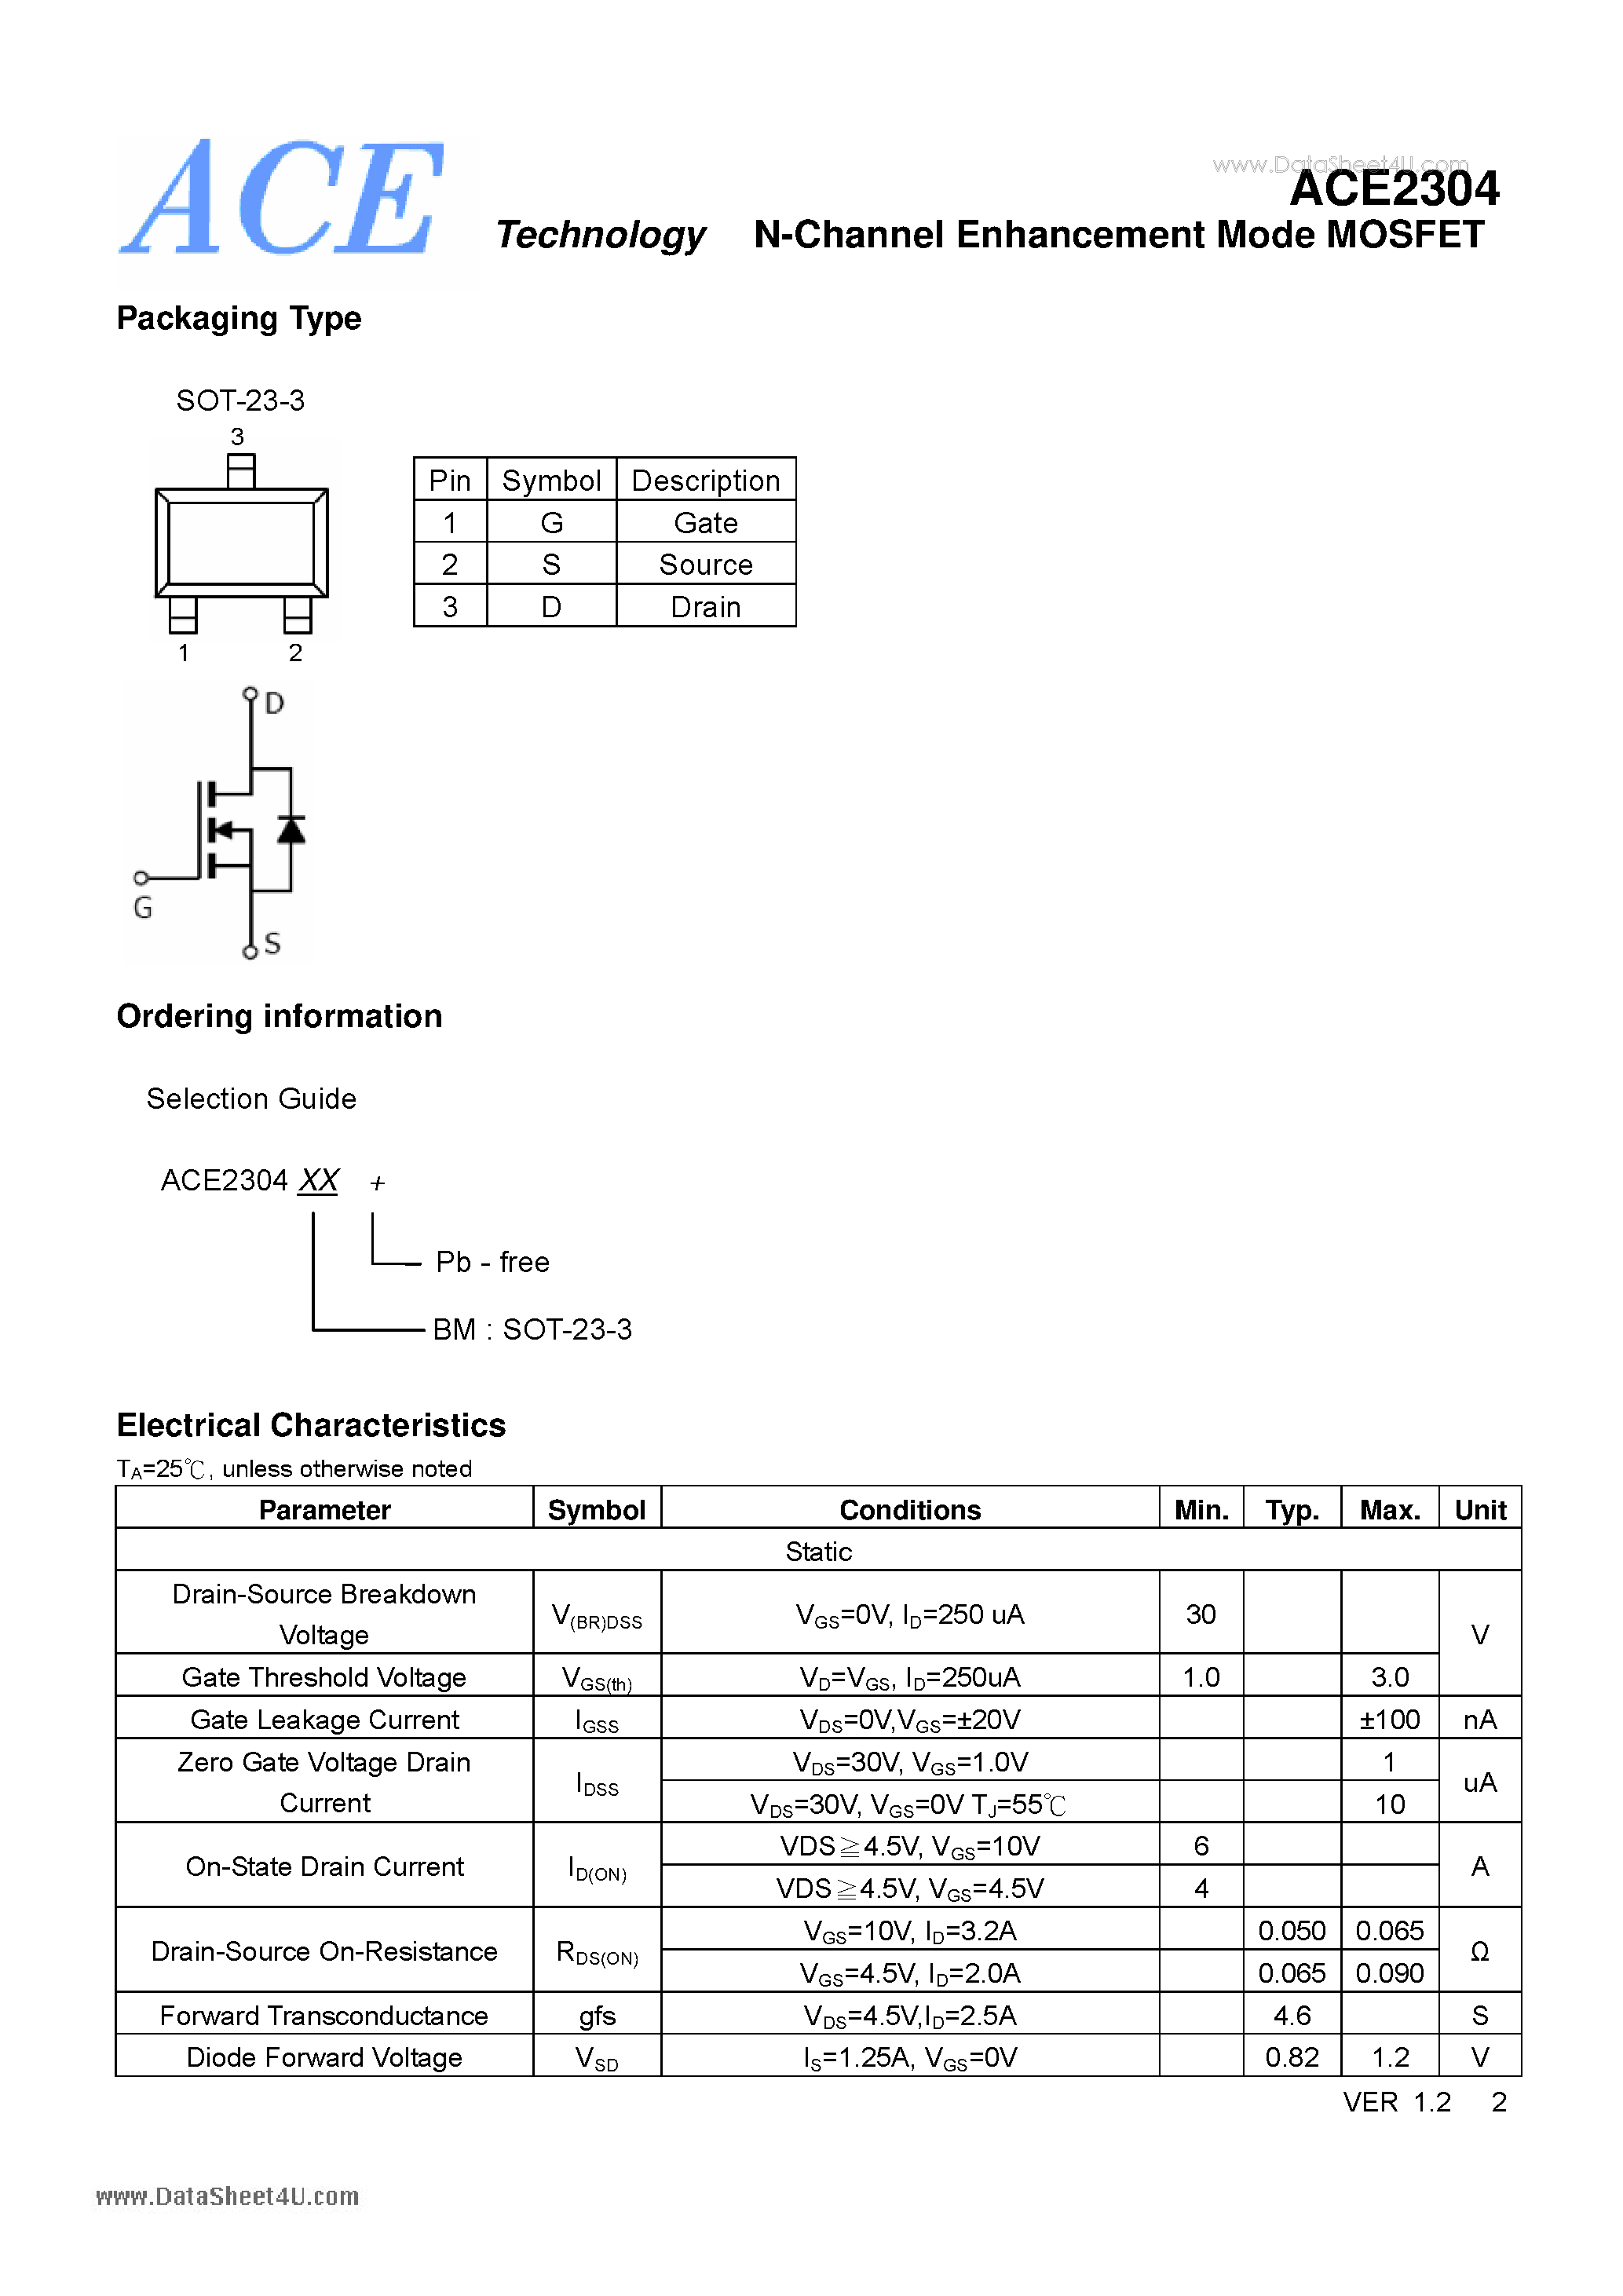 Datasheet ACE2304 - N-Channel Enhancement Mode MOSFET page 2